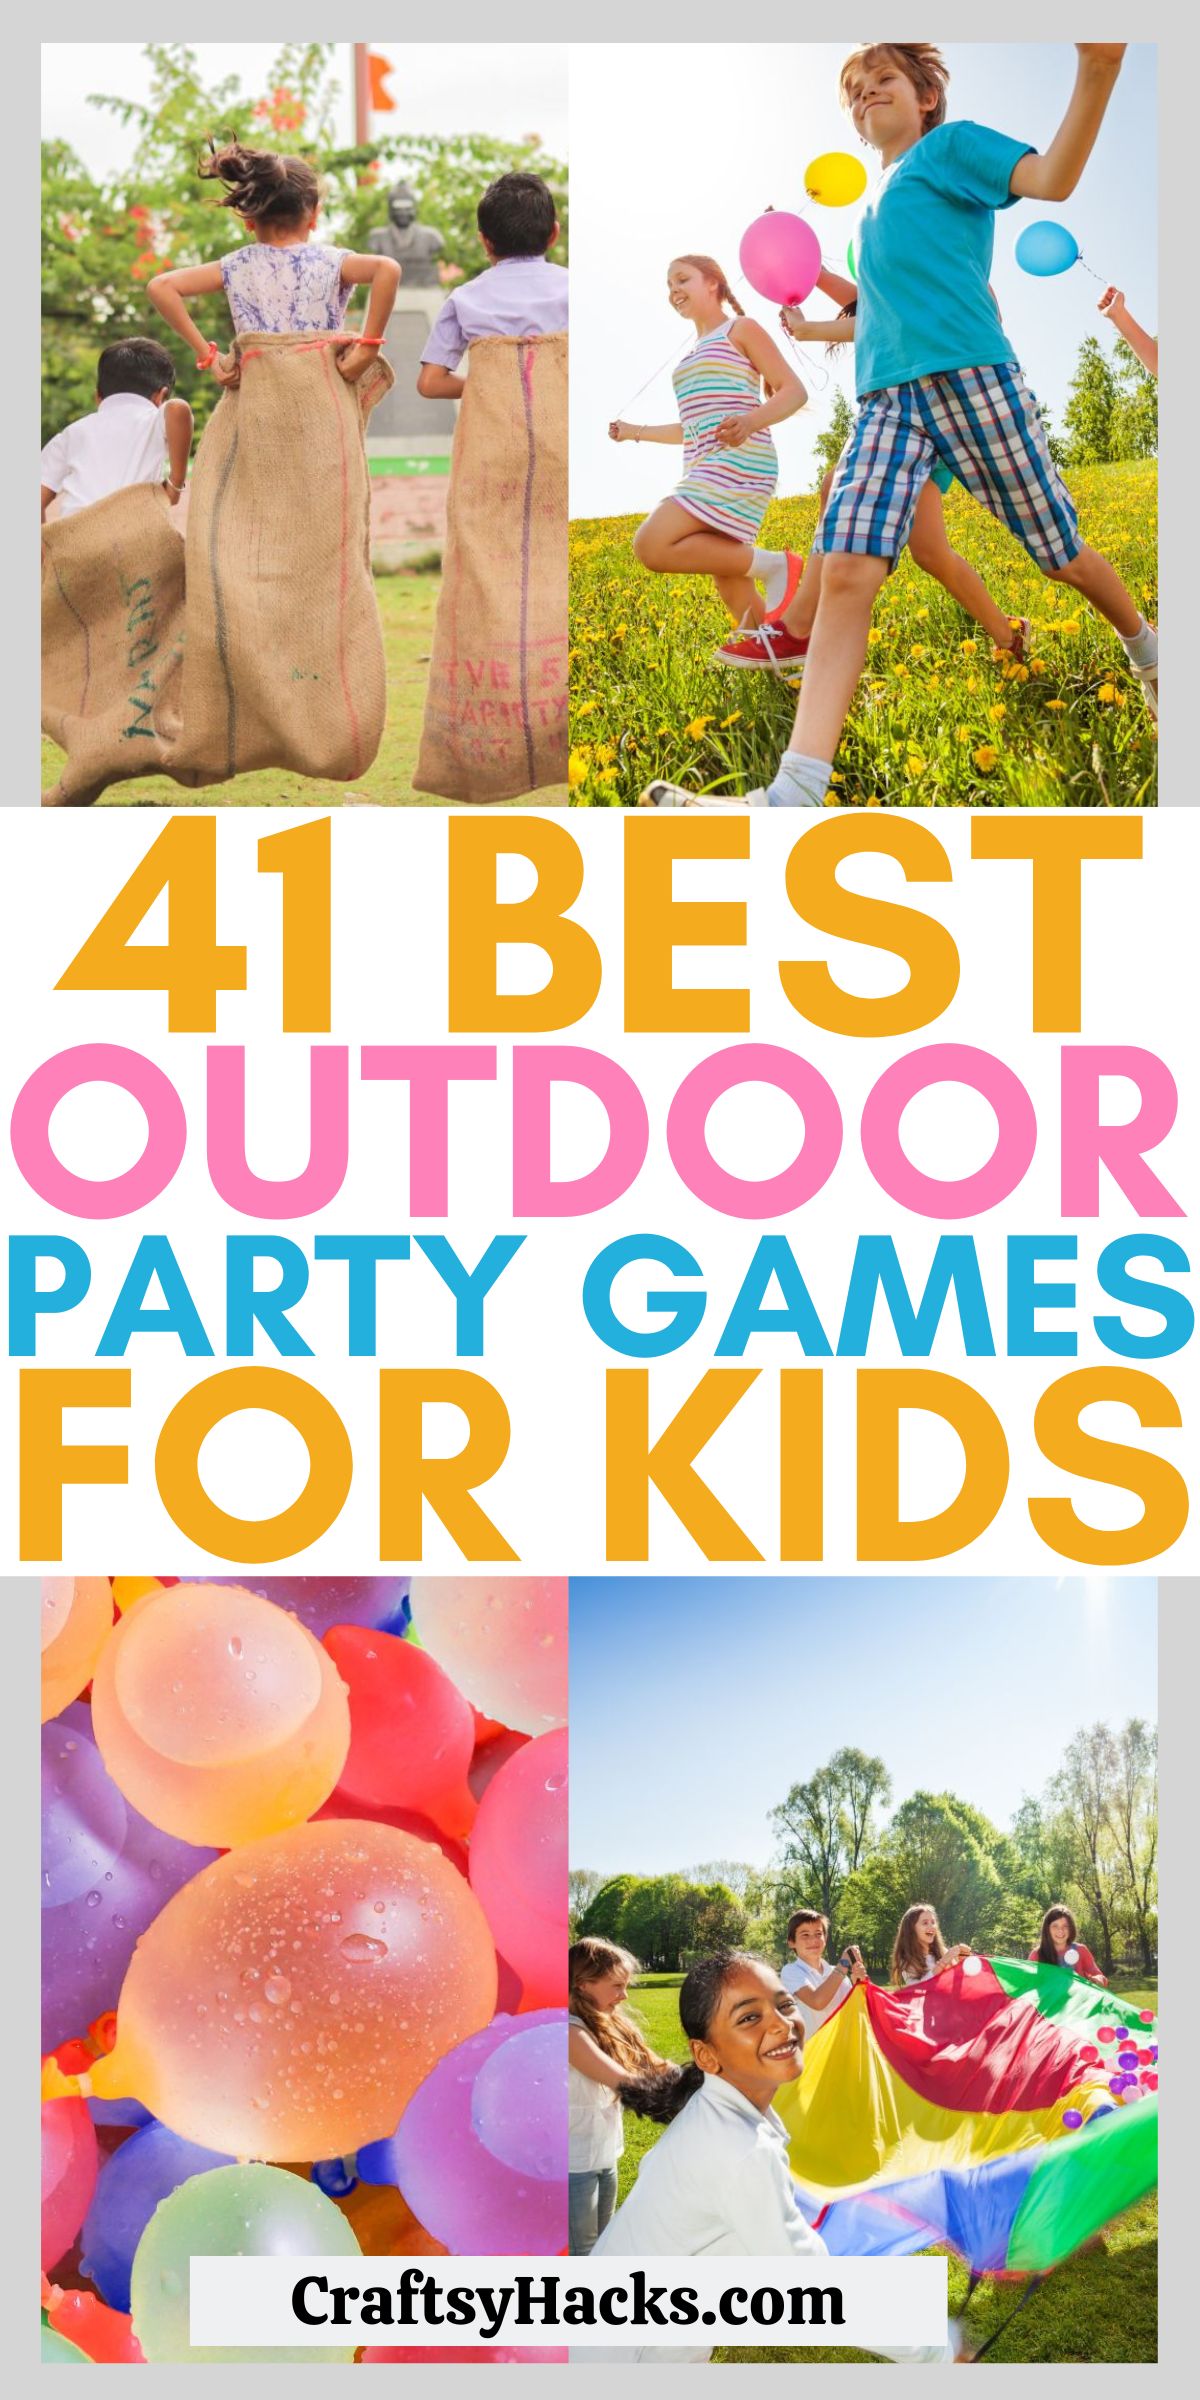 Outdoor Party Games for Kids Birthday